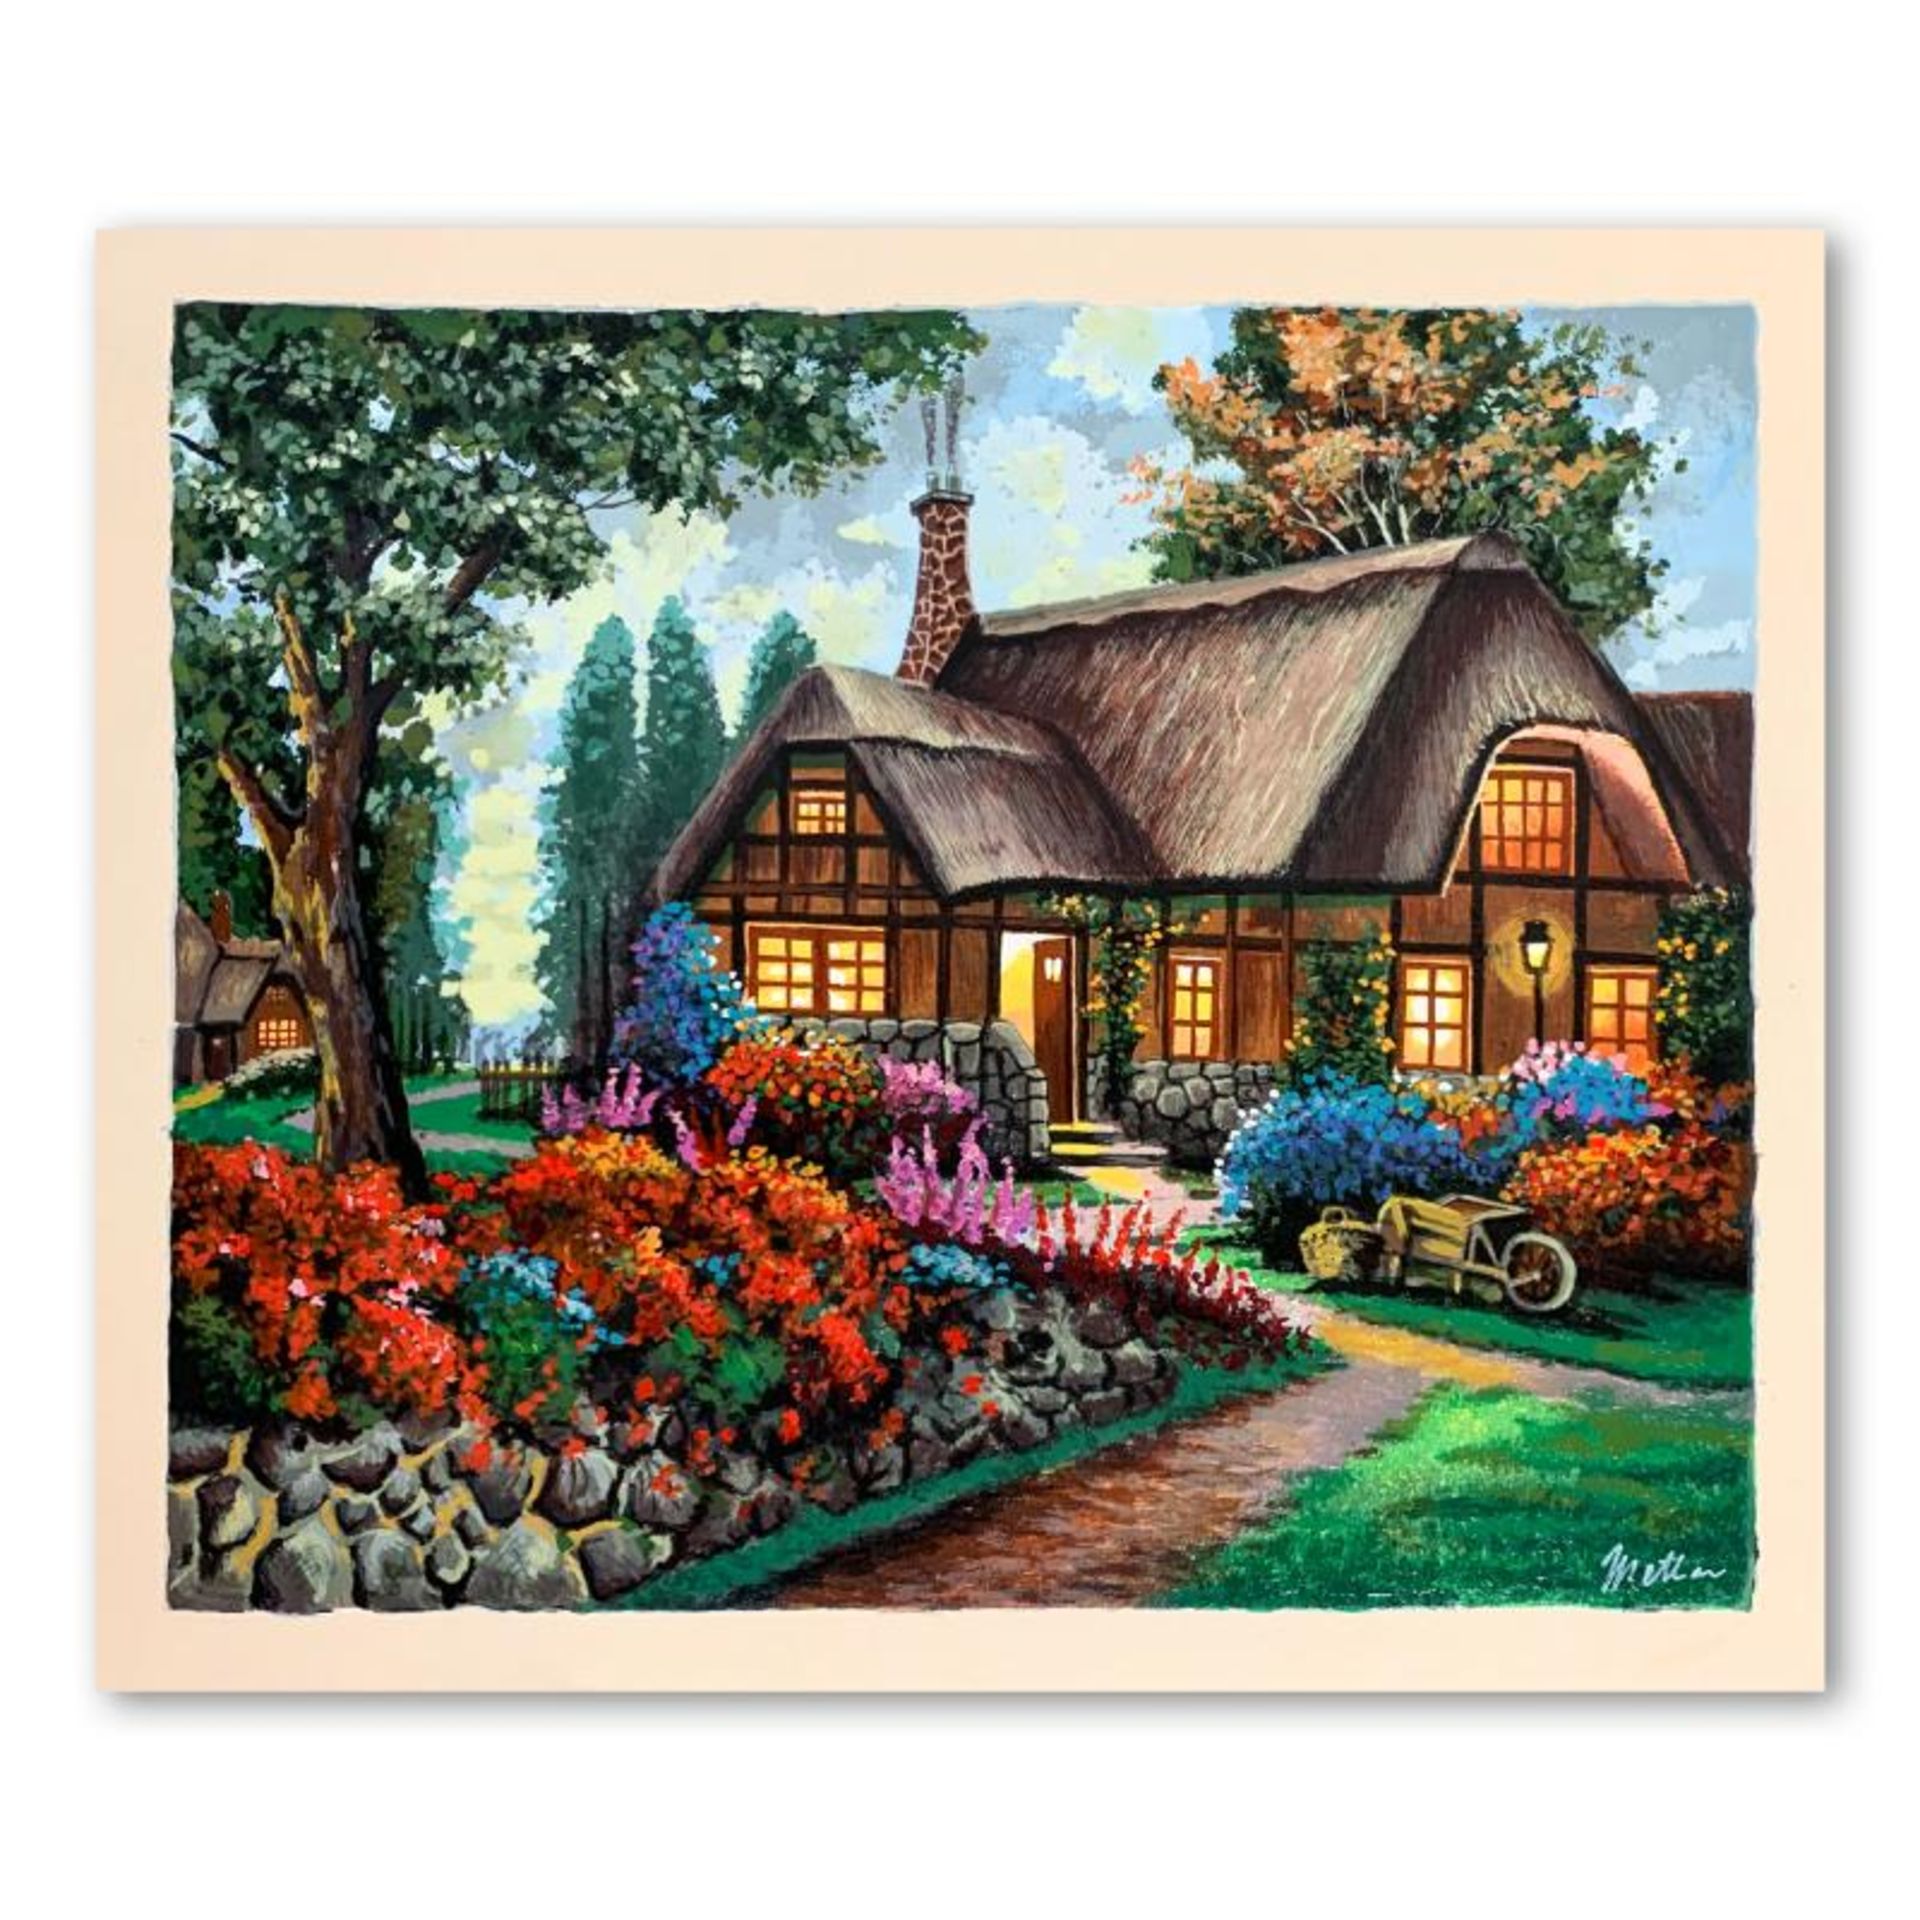 Anatoly Metlan, "Country House" Limited Edition Serigraph, Numbered and Hand Sig